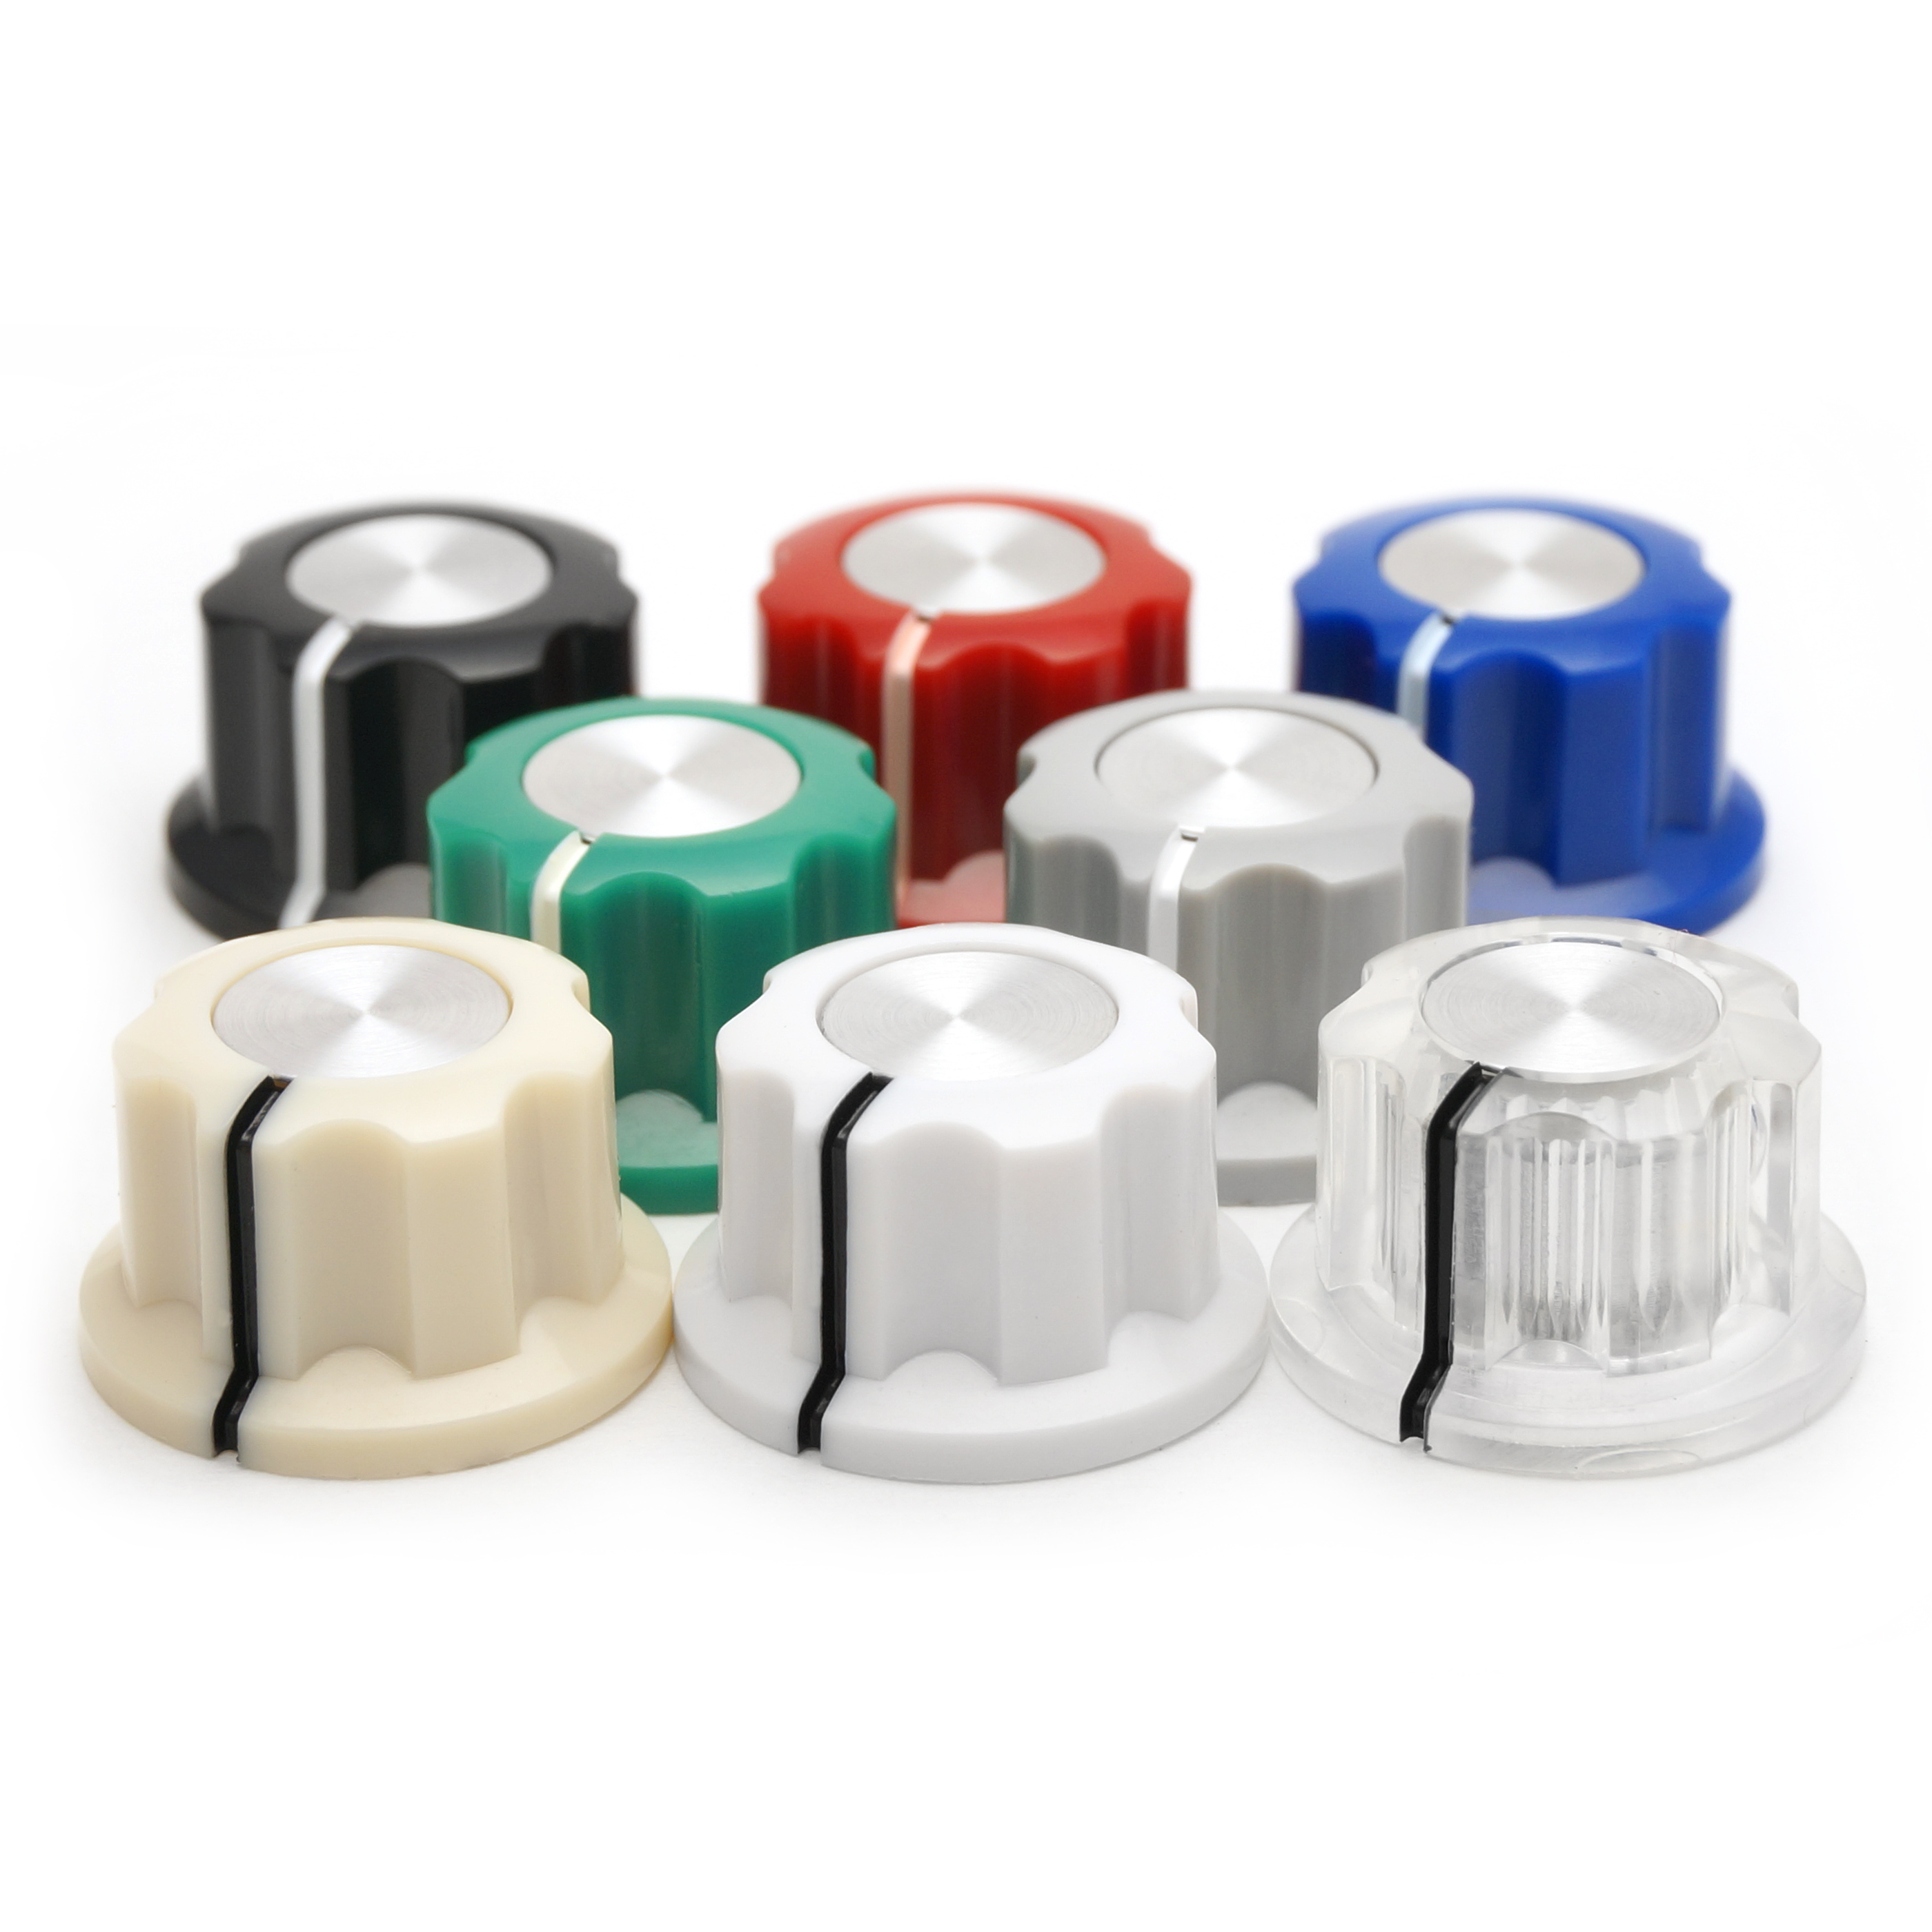 Boss Style Knob in Color - 1/4" Smooth Shaft (20mm OD)